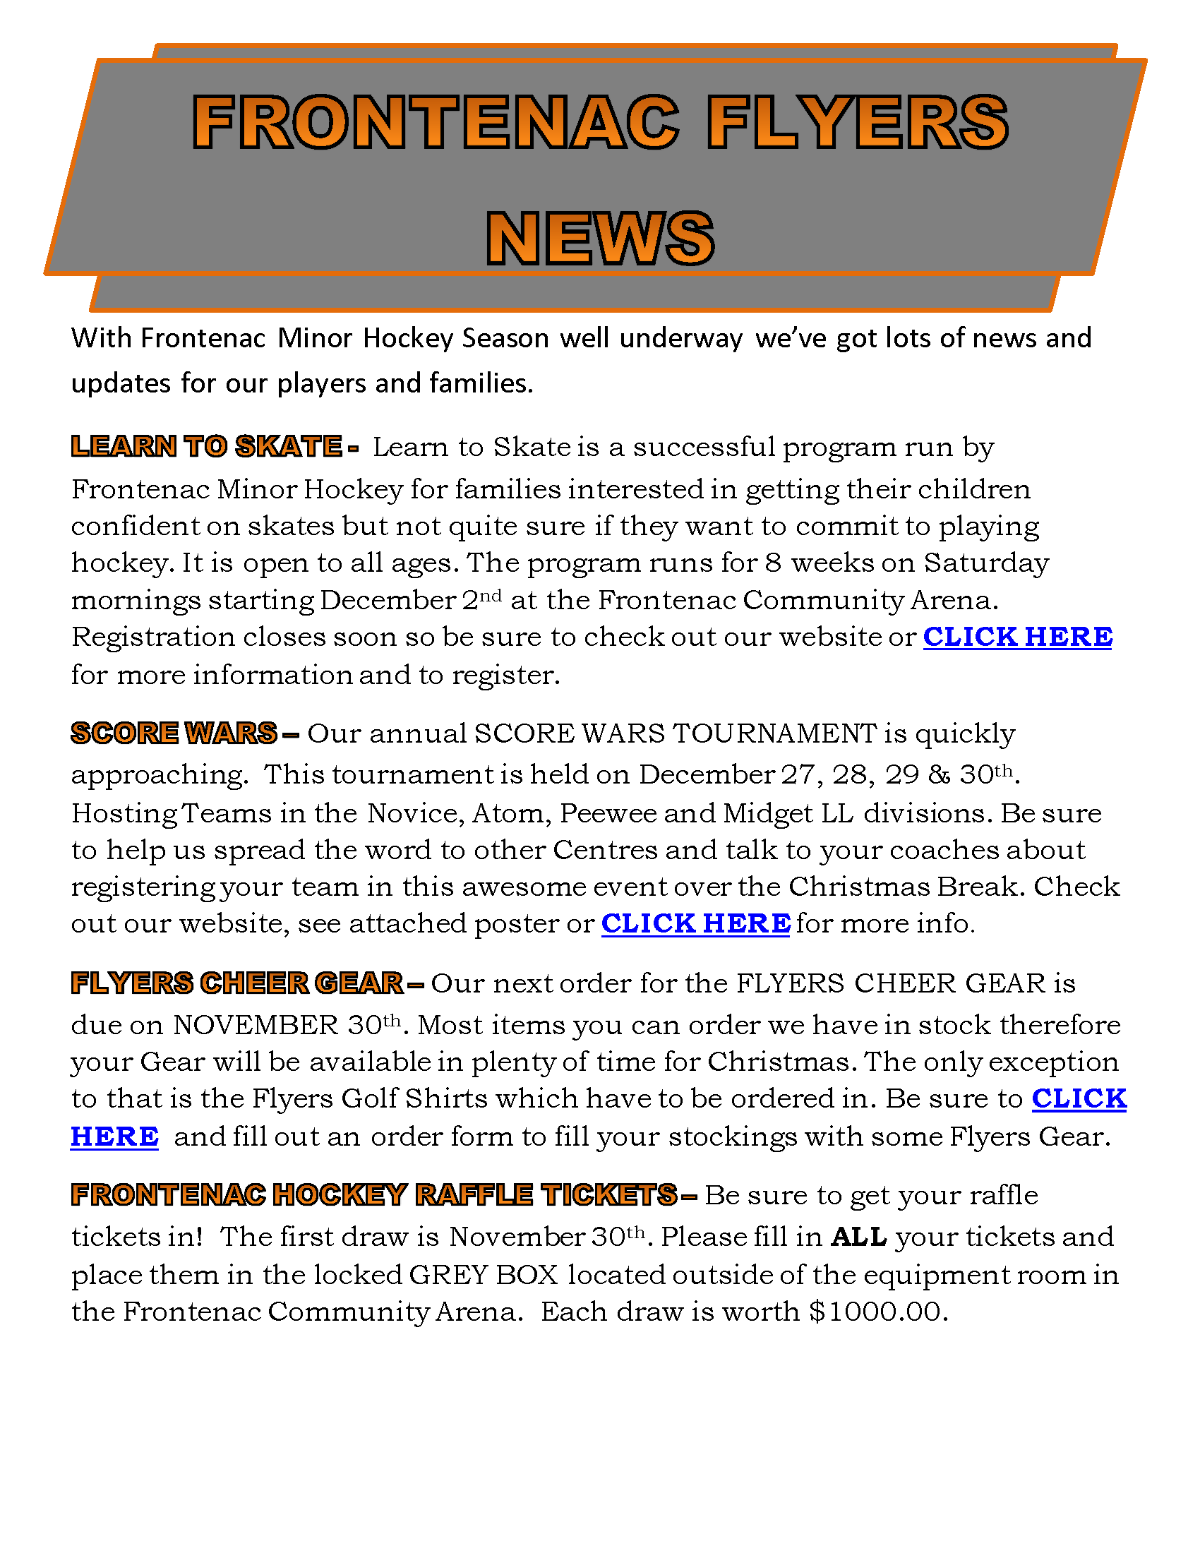 FRONTENAC_FLYERS_NEWS_Nov_2017_Page_1.png